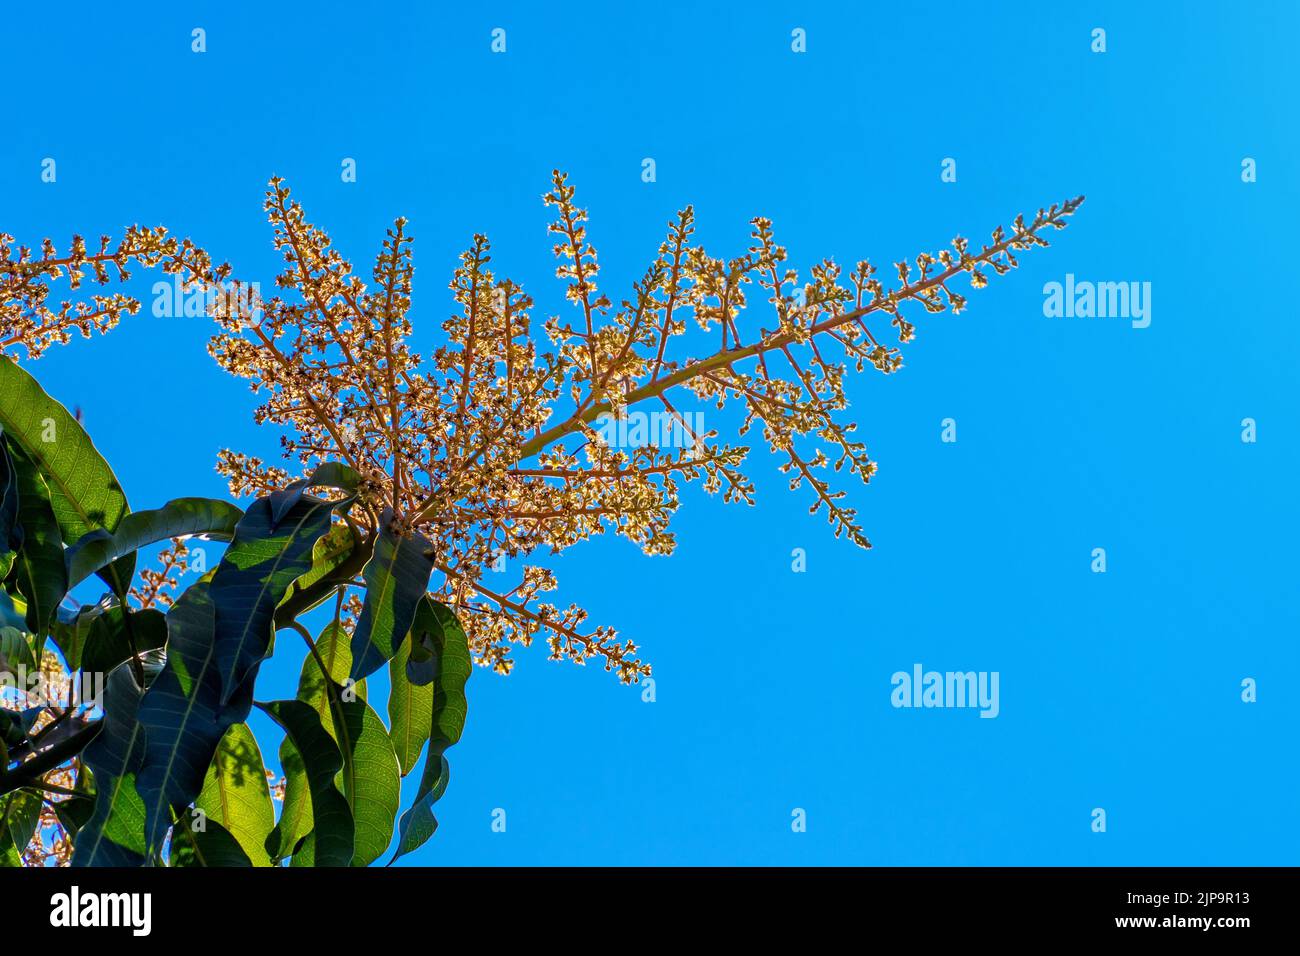 The mango flower blooming in the summer on blue sky, where the mango flower only bloom once a year. Stock Photo